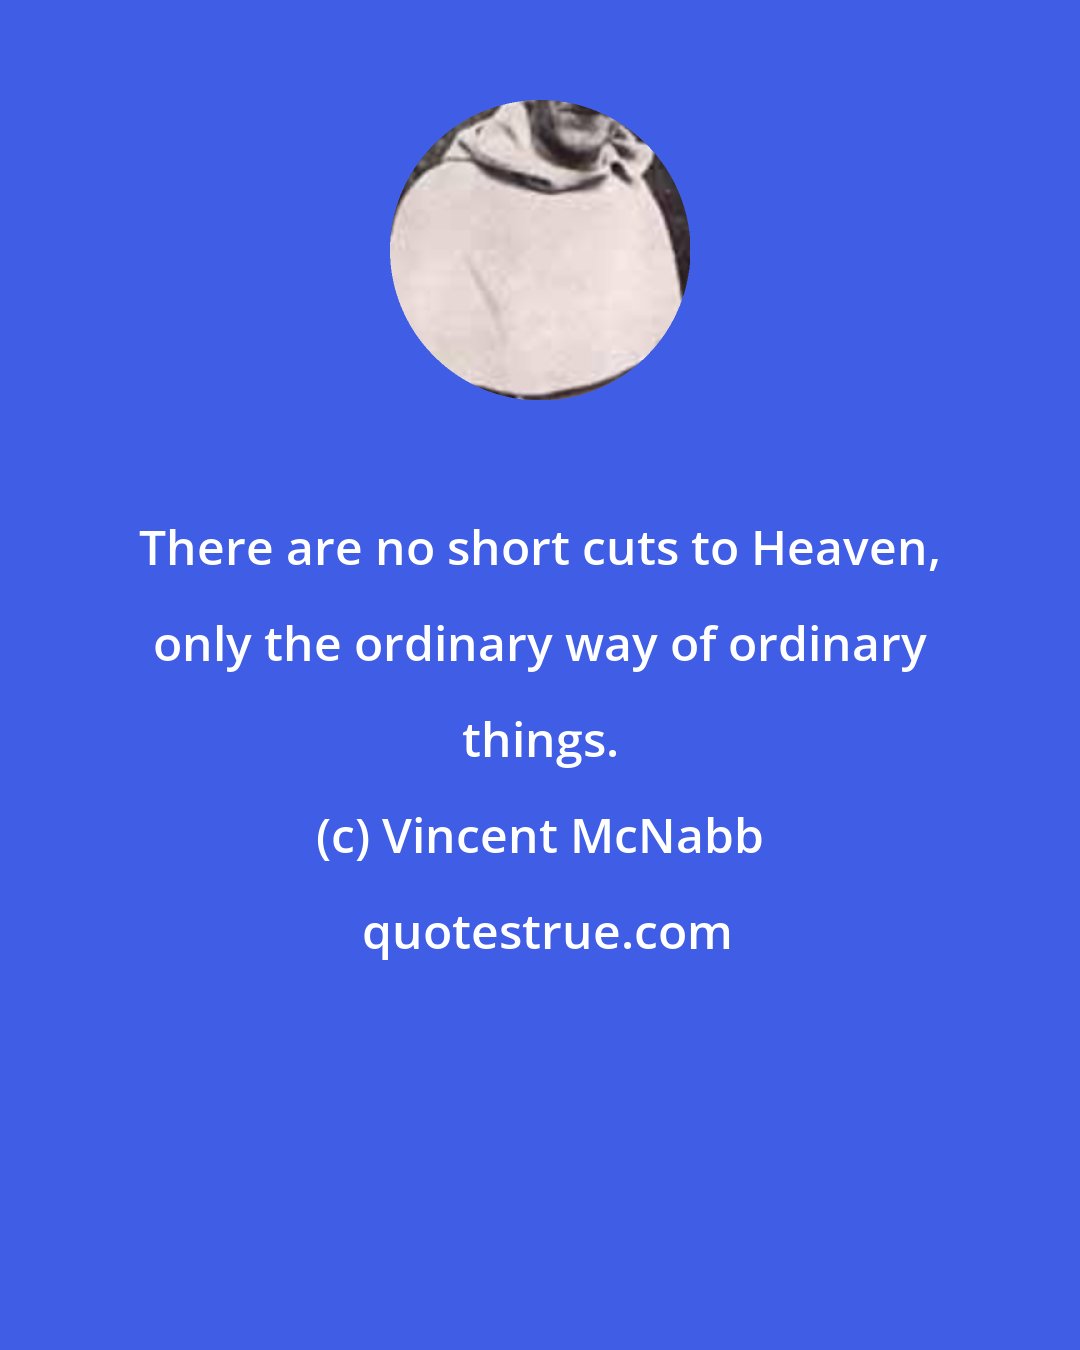 Vincent McNabb: There are no short cuts to Heaven, only the ordinary way of ordinary things.